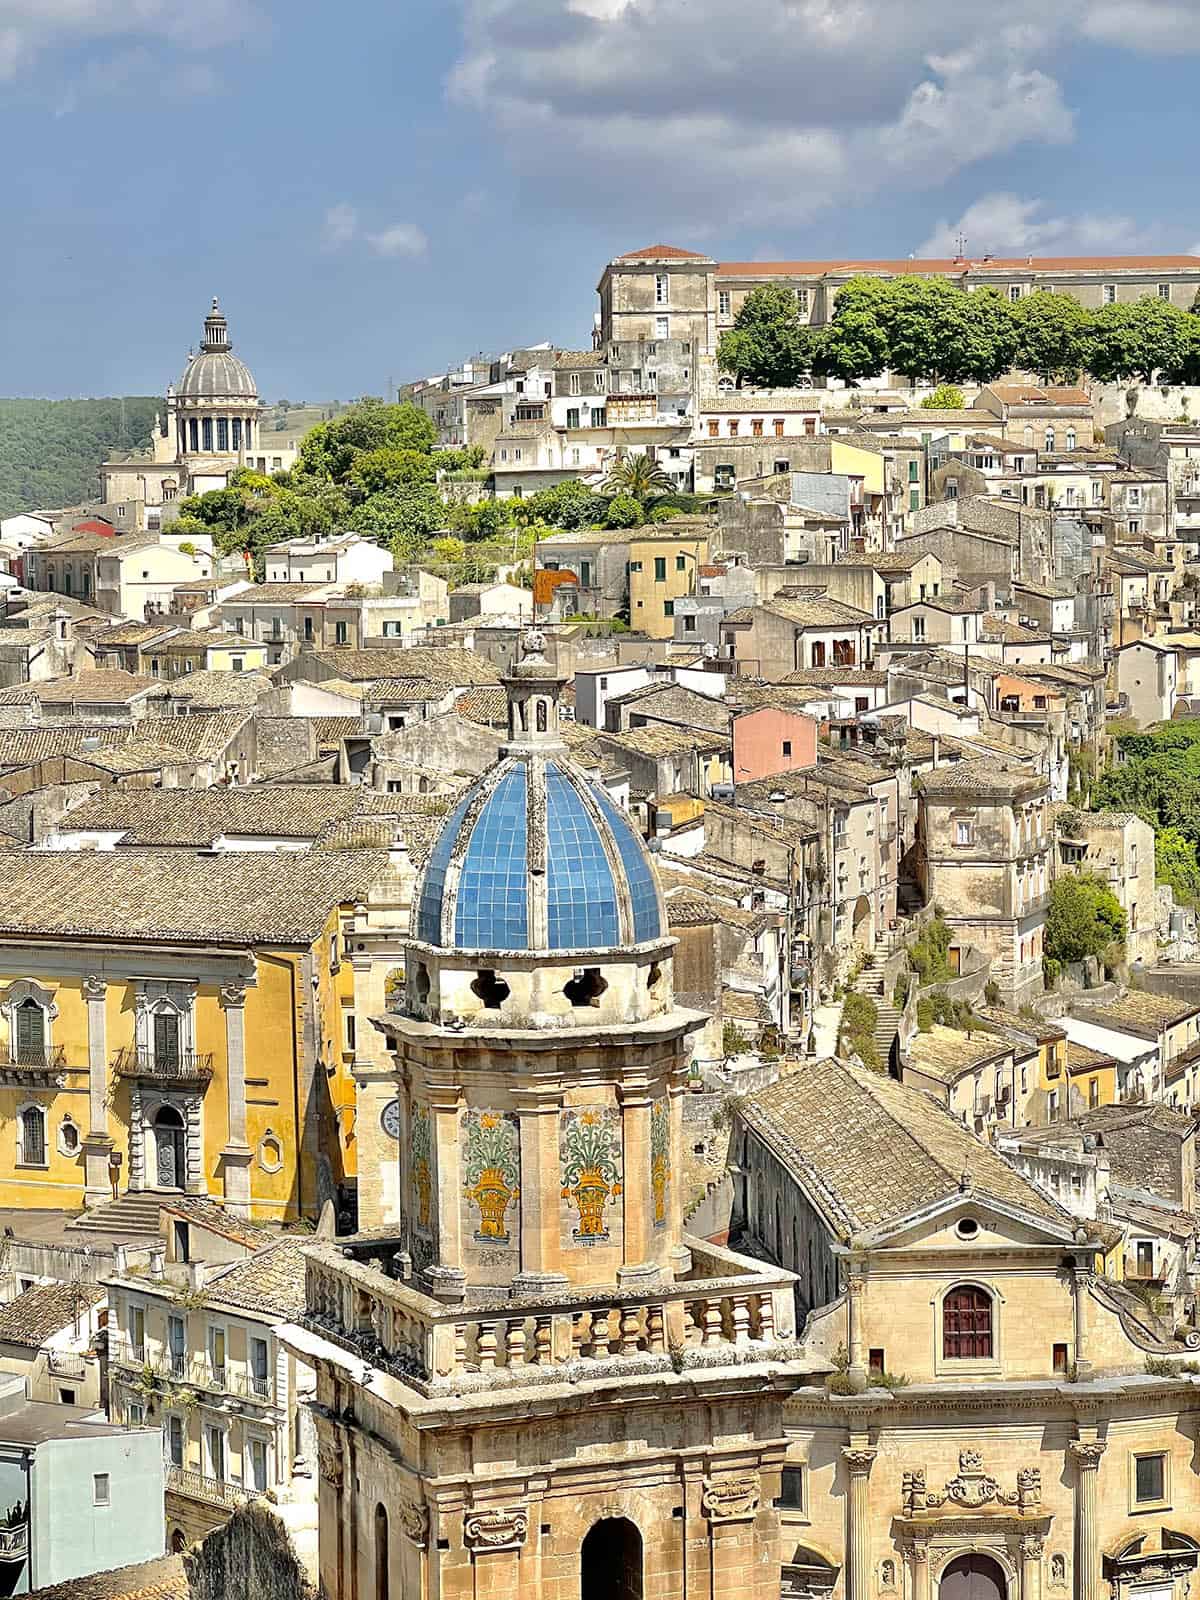 An image of the beautiful skyline of Ragusa Ibla, as seen from Ragusa Superior. The image is taken on a bright sunny day. 